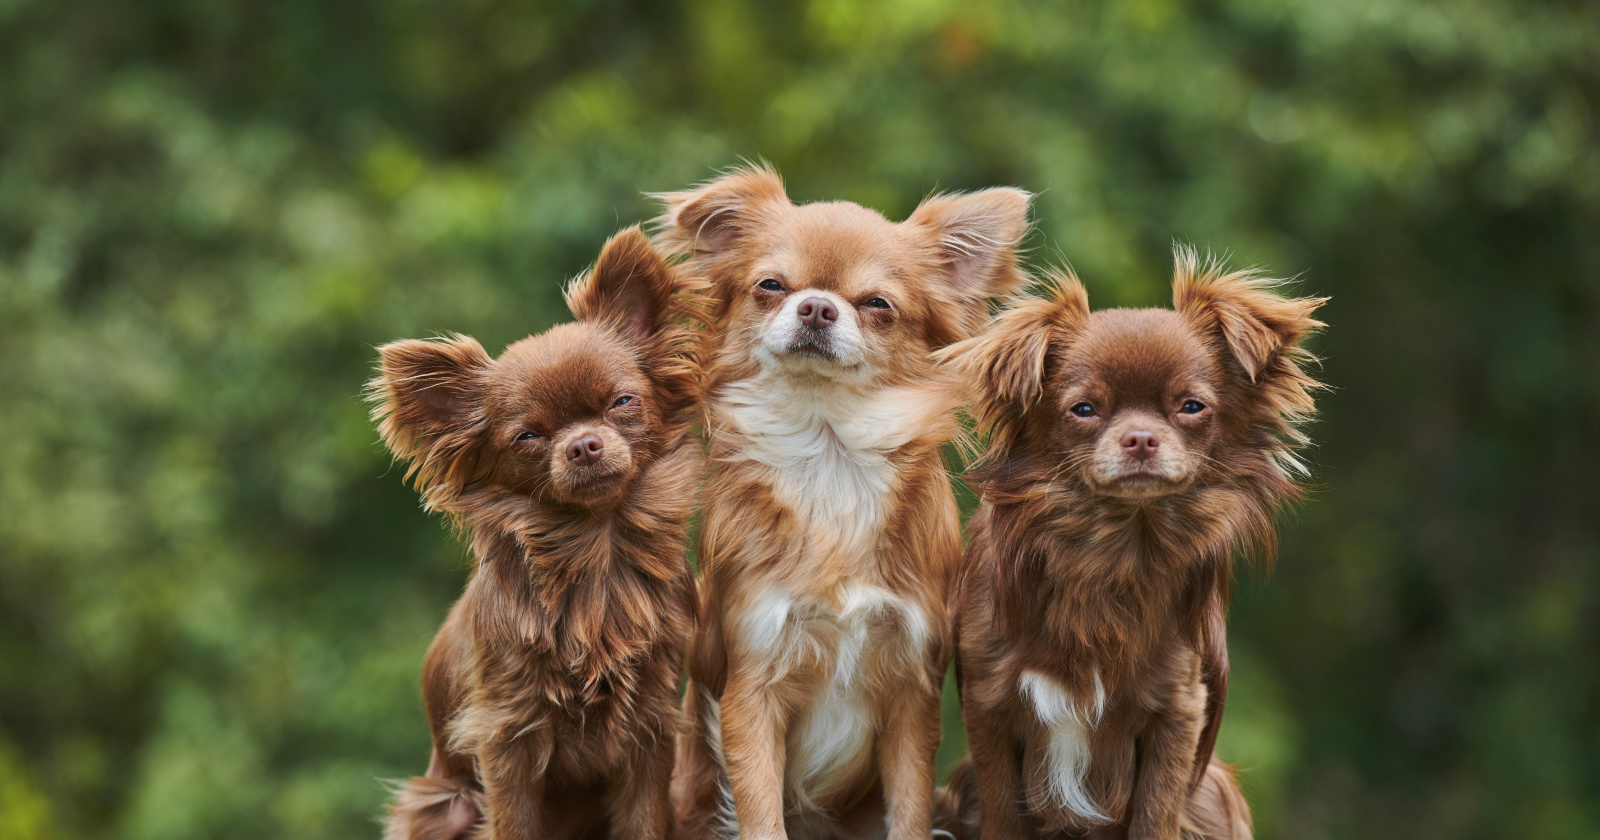 Are Chihuahuas Hypoallergenic Dogs? DogVills